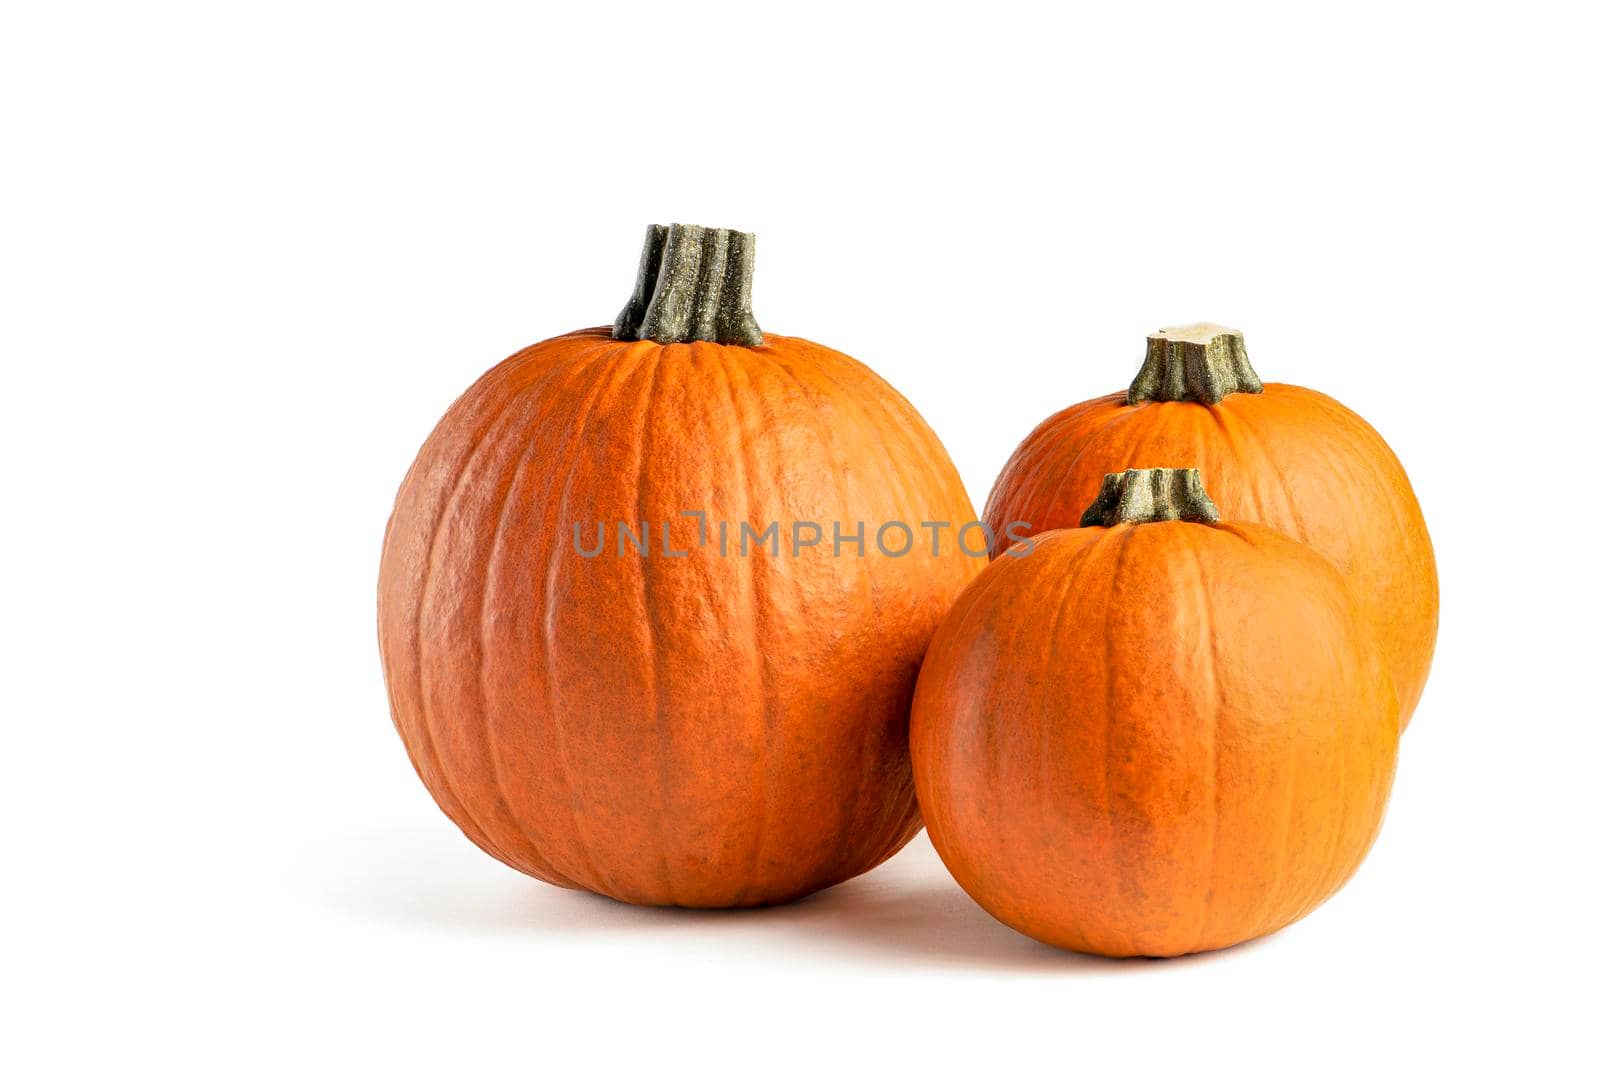 Pumpkin on a white background. Isolated halloween pumpkin isolate on white to insert into your project or design. Three orange pumpkins stacked in a pile cast a shadow.